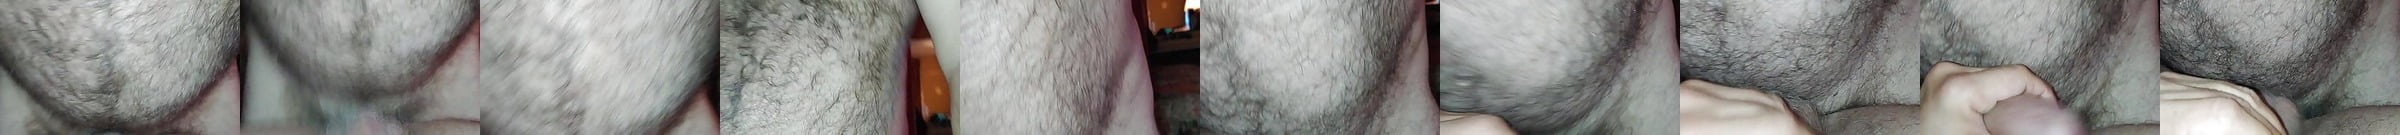 My Hairy Cock Free Hairy Gay Hd Porn Video Fc Xhamster Xhamster